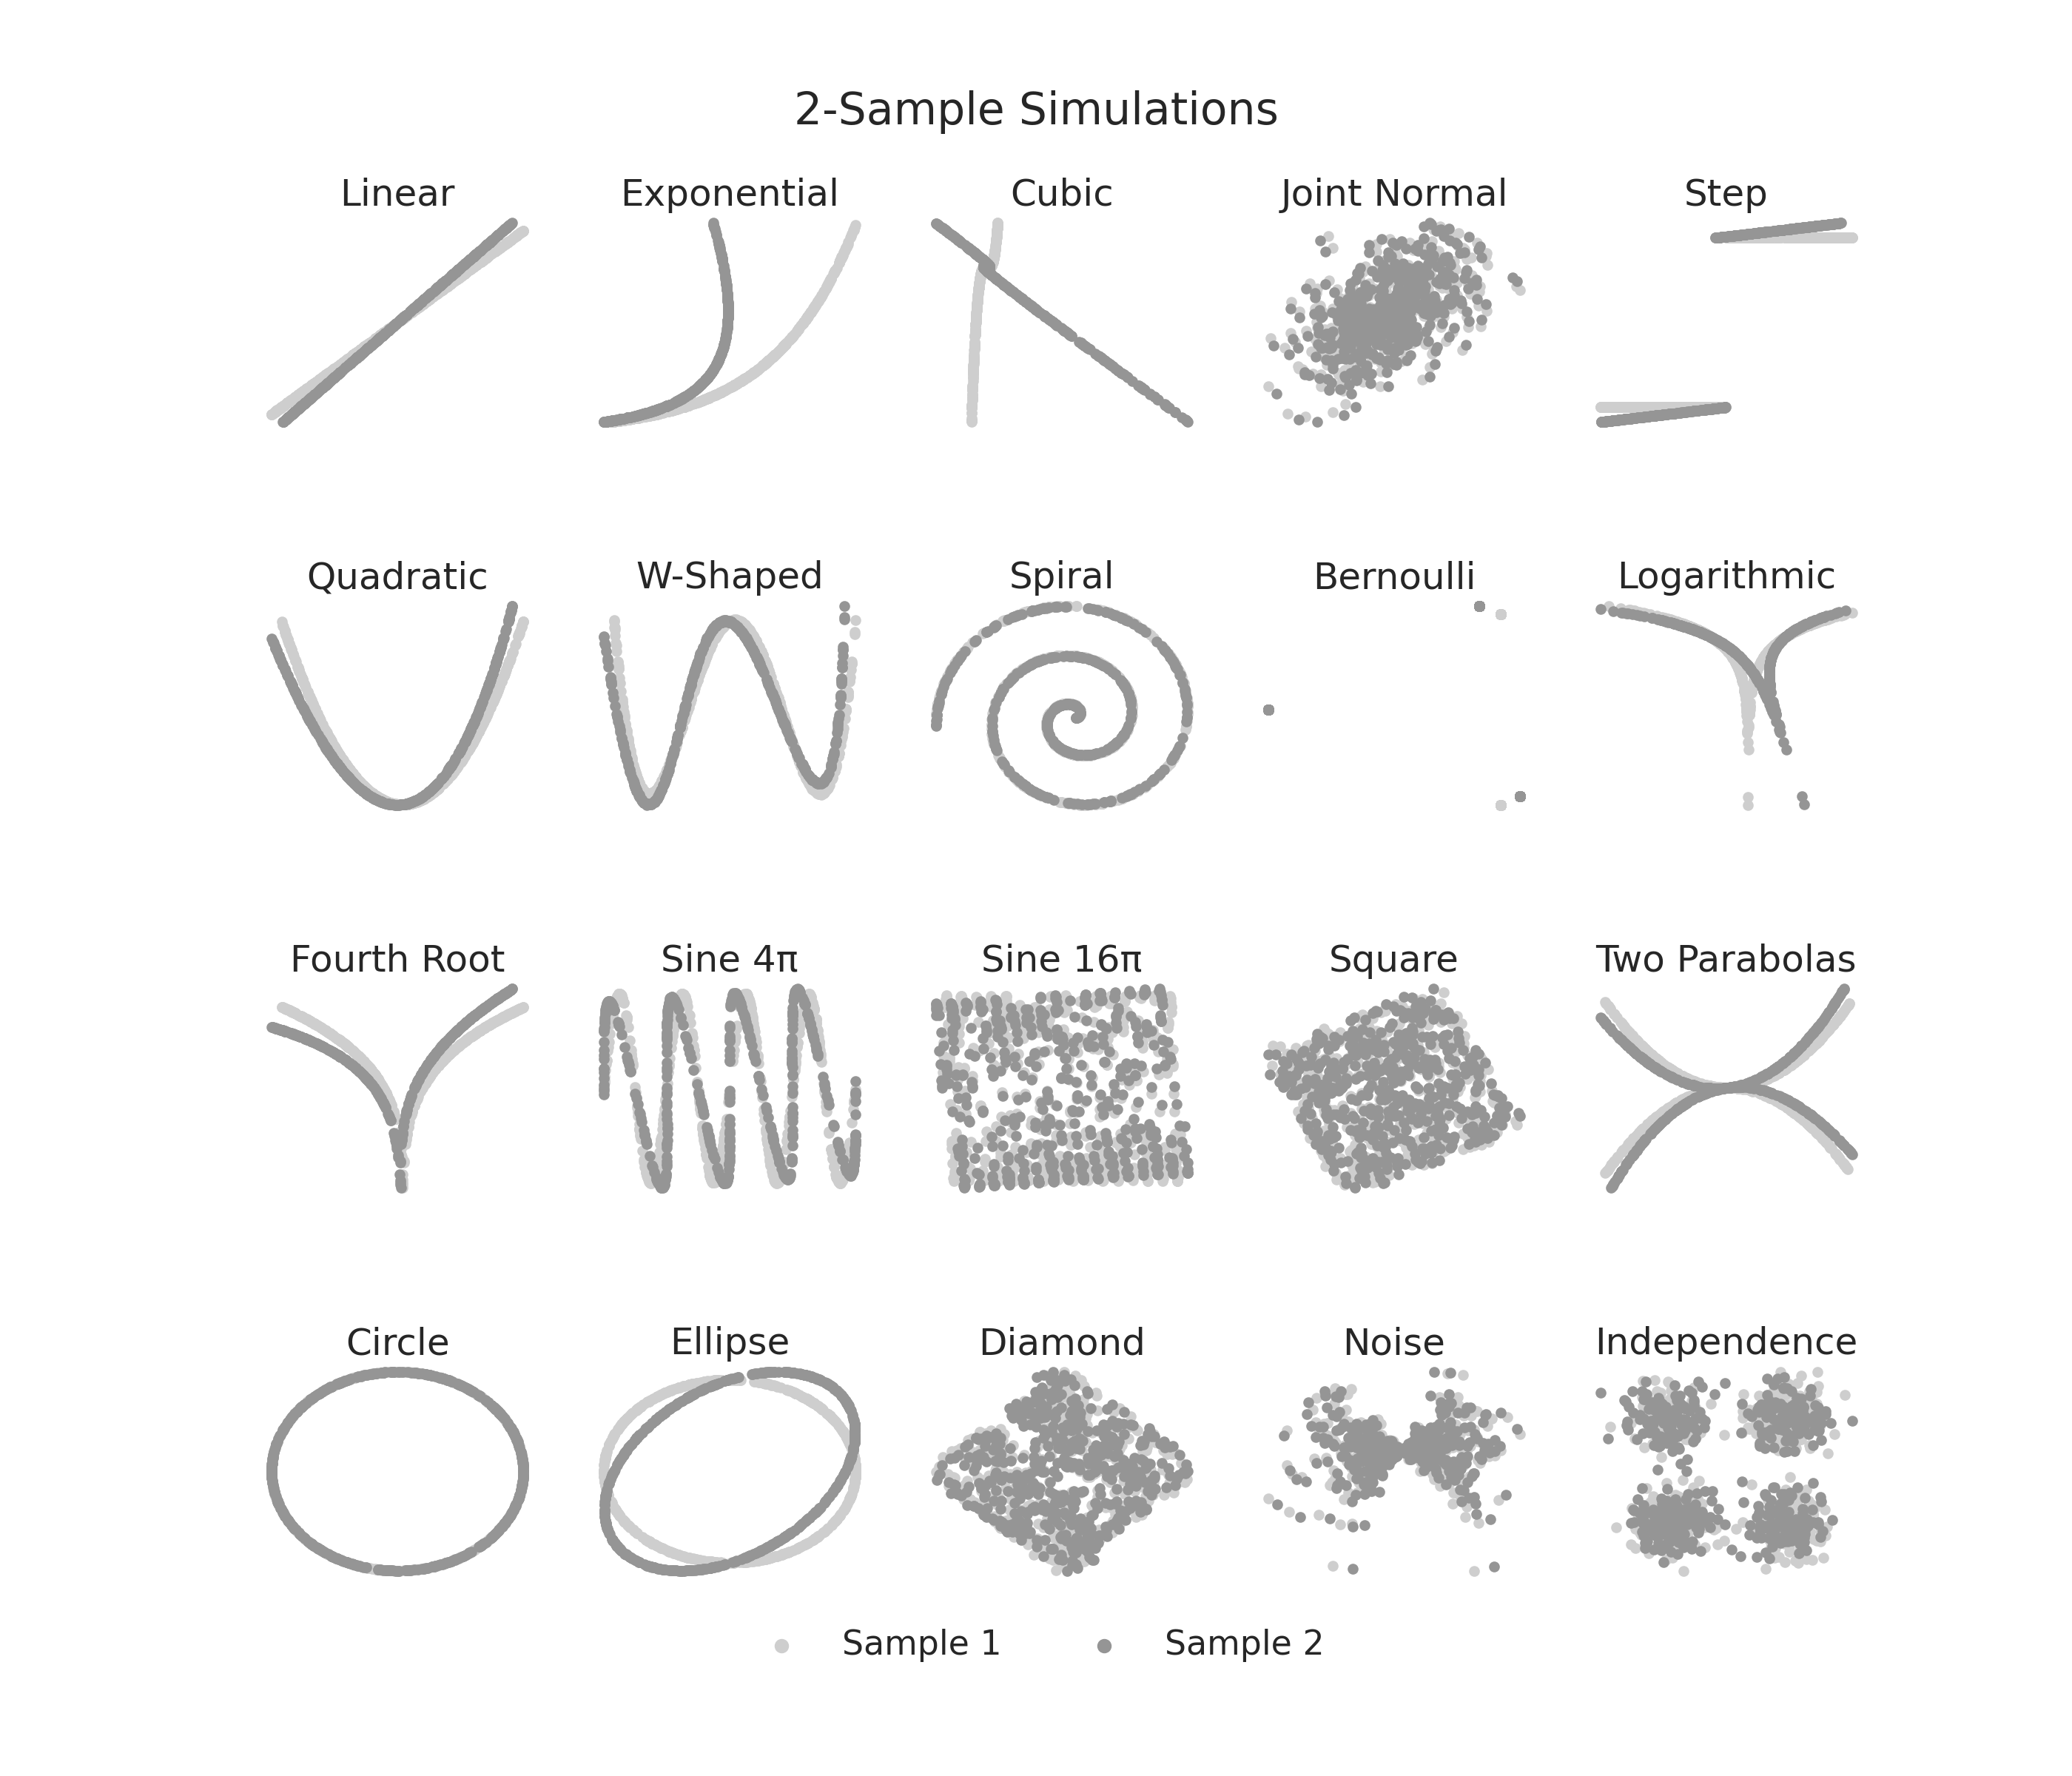 2-Sample Simulations, Linear, Exponential, Cubic, Joint Normal, Step, Quadratic, W-Shaped, Spiral, Bernoulli, Logarithmic, Fourth Root, Sine 4π, Sine 16π, Square, Two Parabolas, Circle, Ellipse, Diamond, Noise, Independence